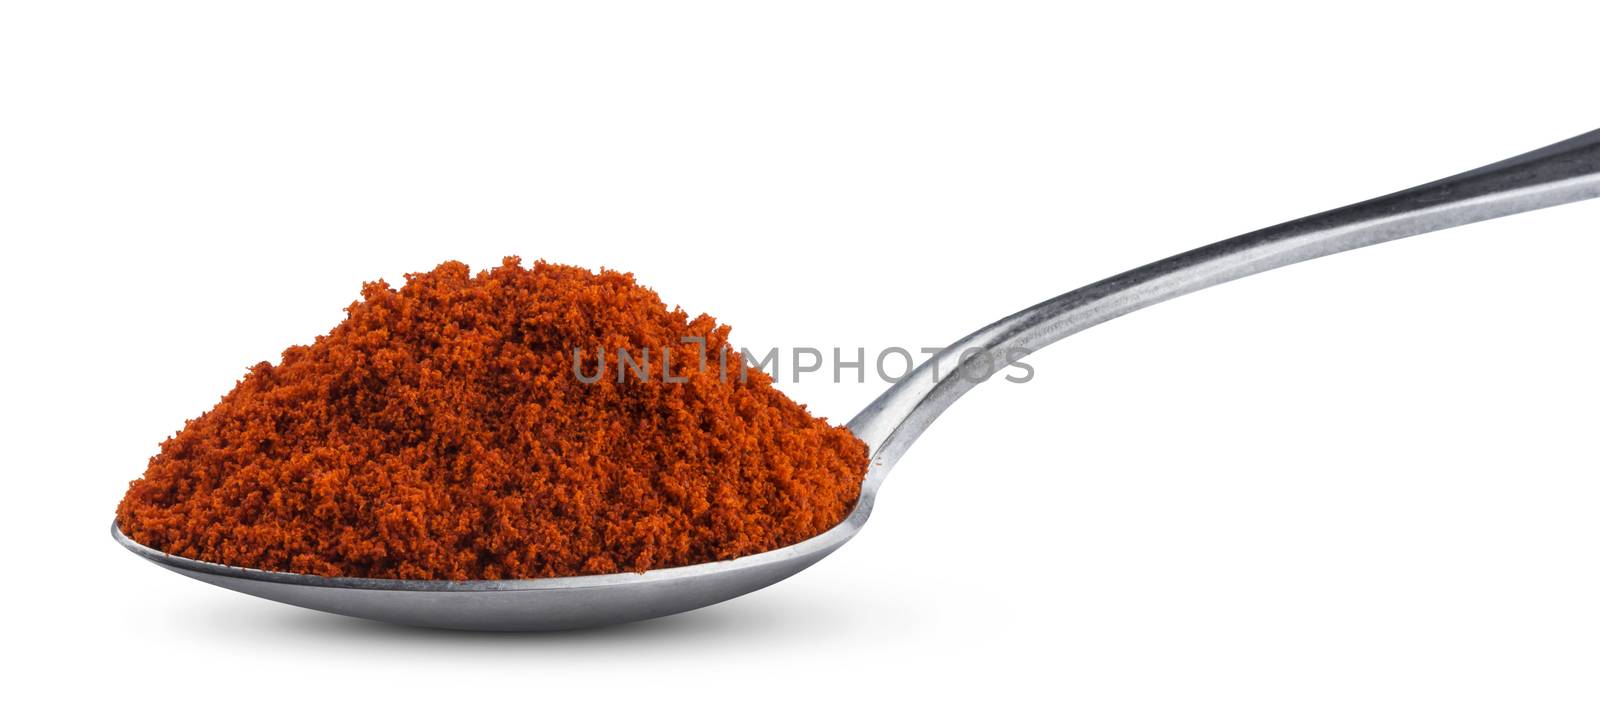 Pile of red paprika powder in spoon isolated on white background with clipping path, ground hot red pepper spice